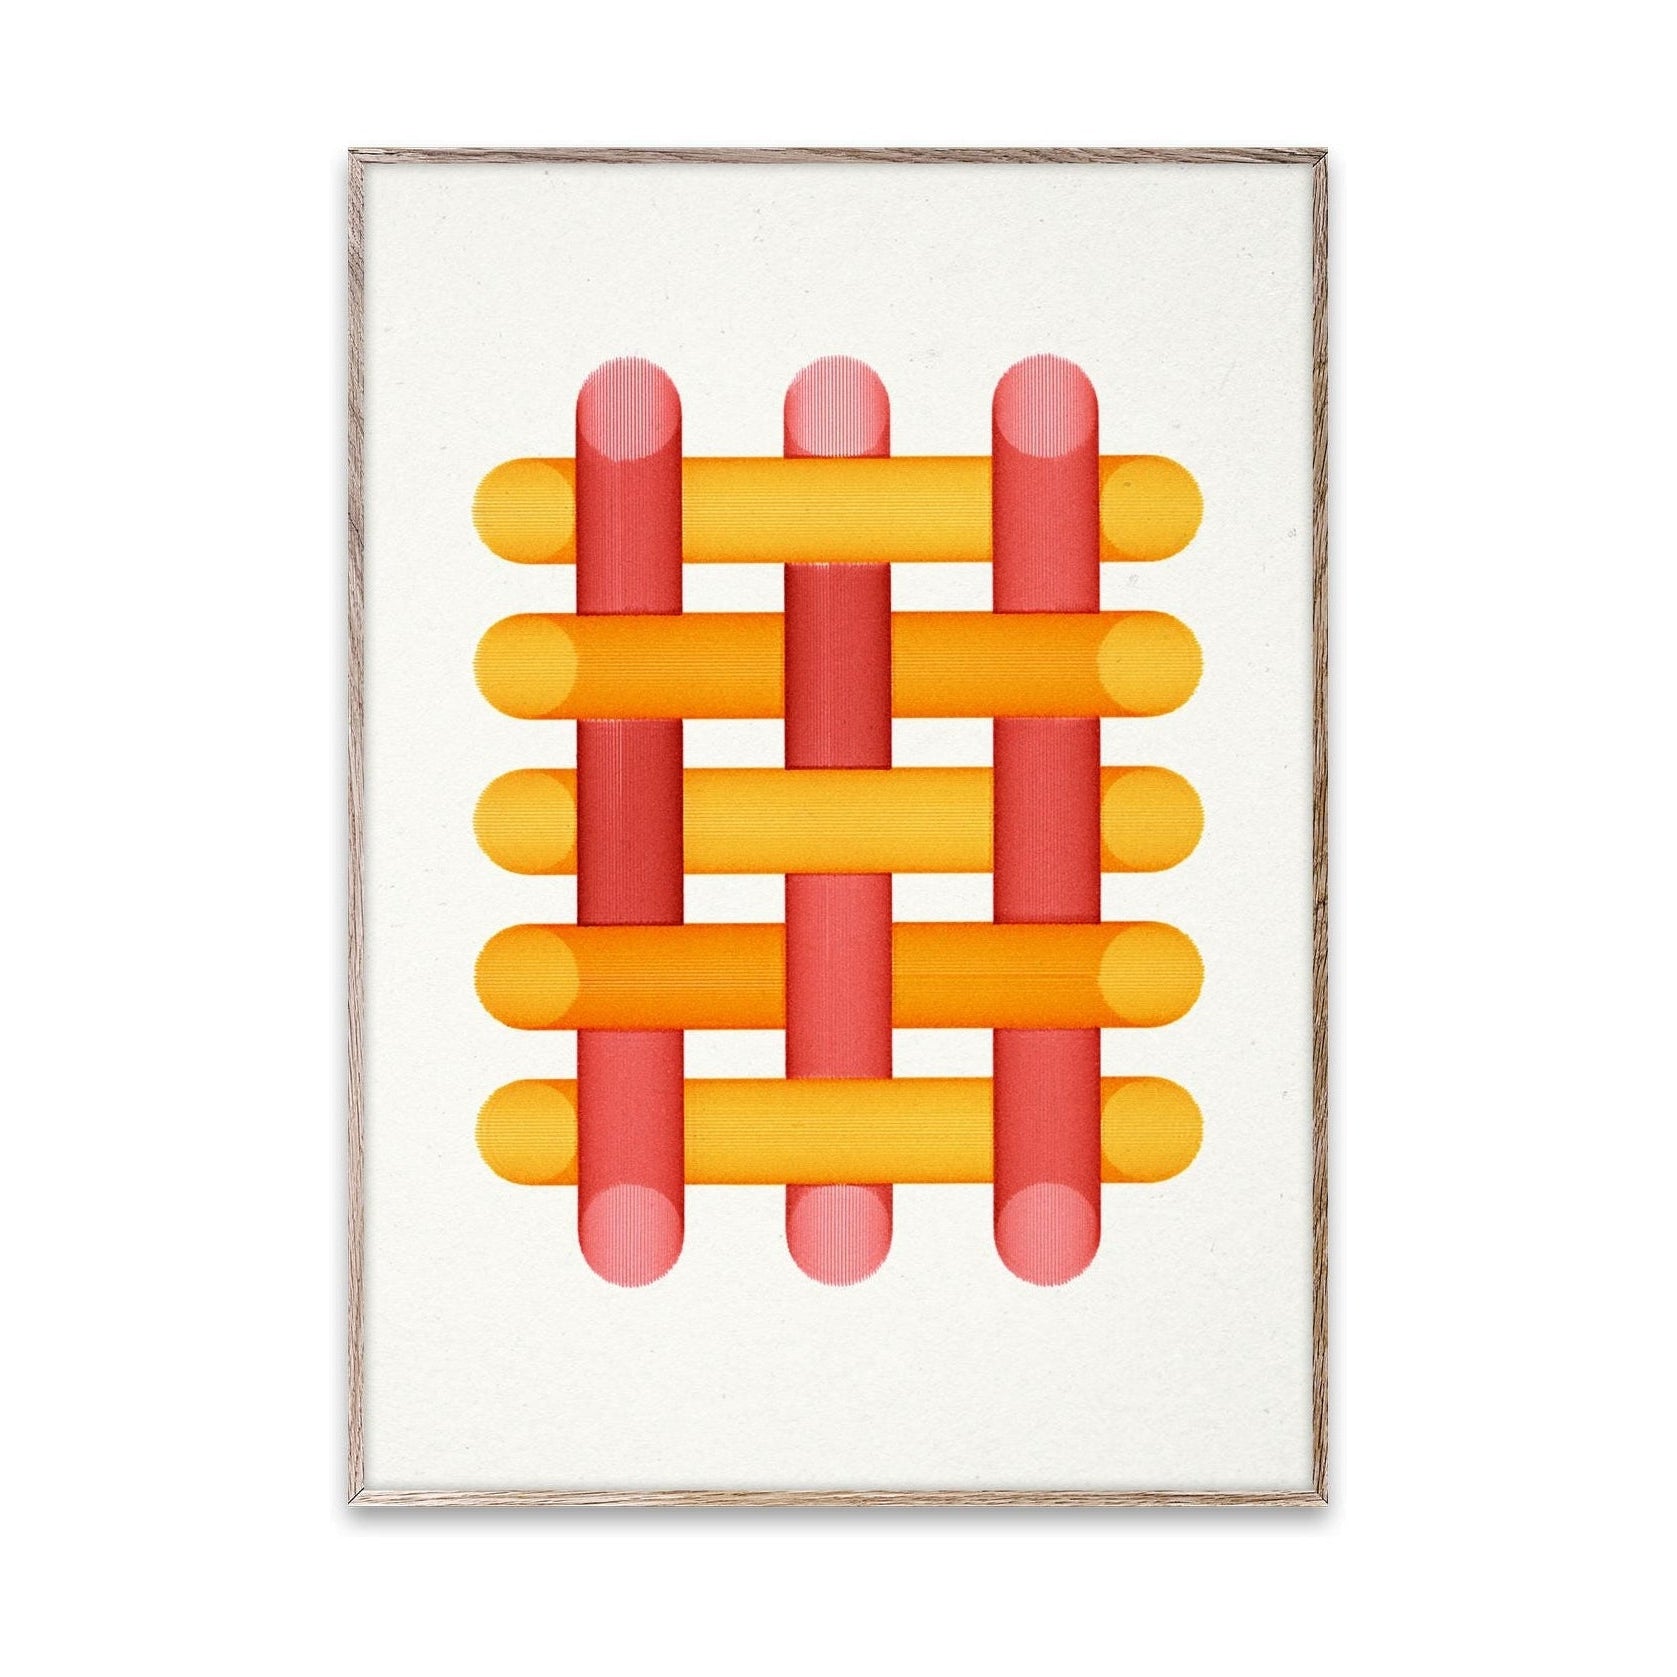 Paper Collective The Weave Poster, 50x70 Cm